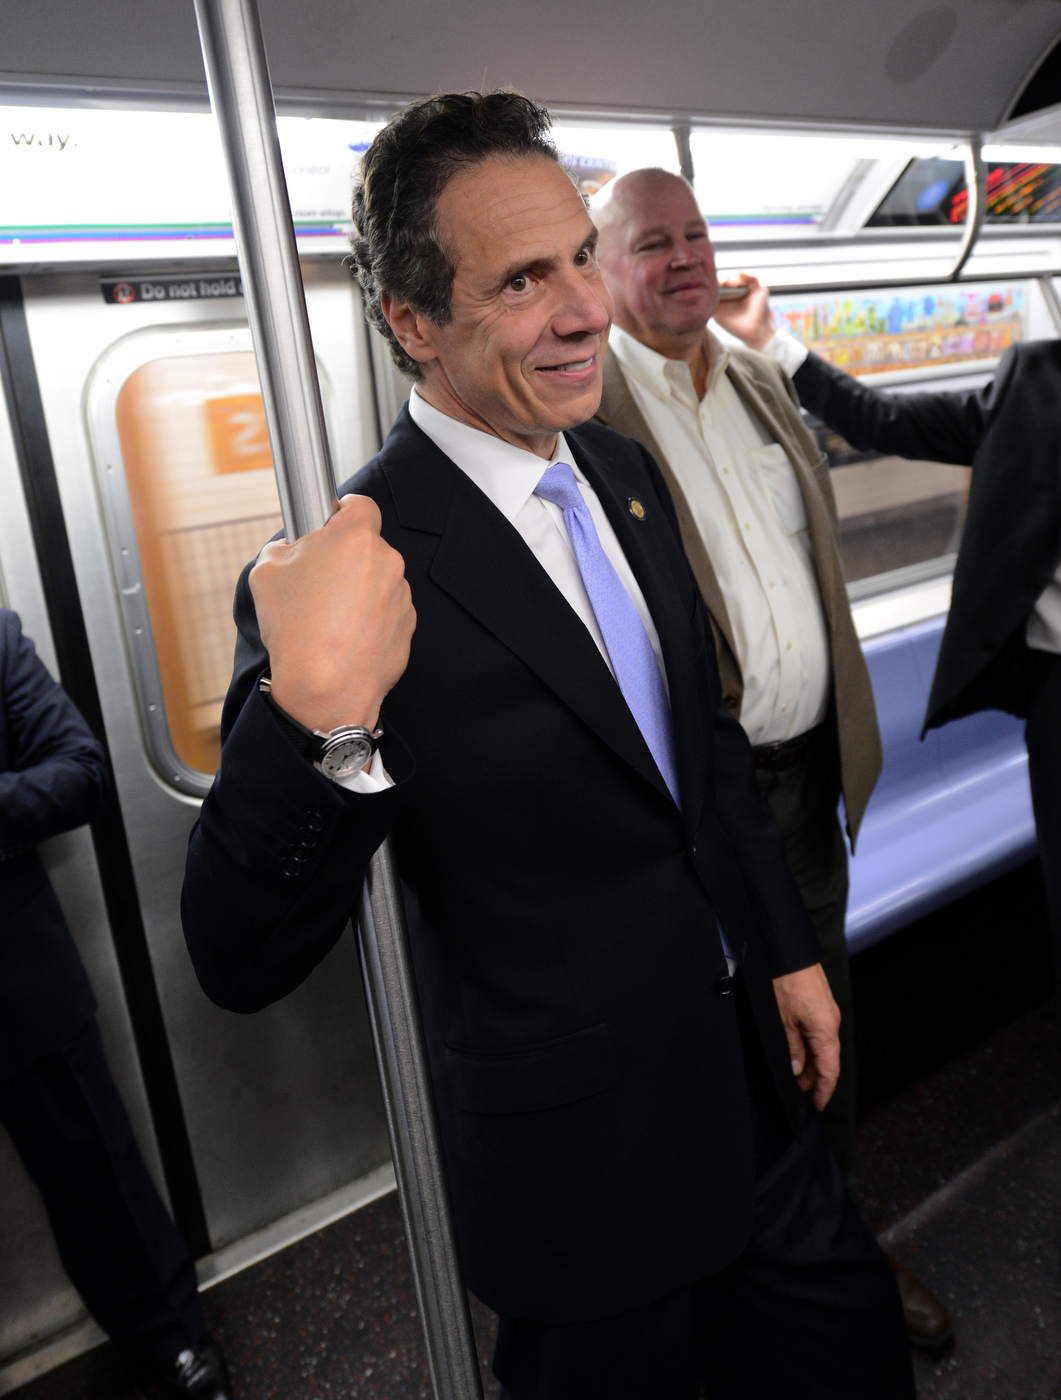 New York Governor Andrew M. Cuomo and MTA Chairman and CEO Thomas Prendergast rode an E train from Chambers St. to 34 St.-Penn Station on Thu., September 25, 2014 to assure New Yorkers that all security precautions are being taken, and that the subway system is safe amid reports of unspecified threats. Photo: Marc A. Hermann / MTA New York City Transit